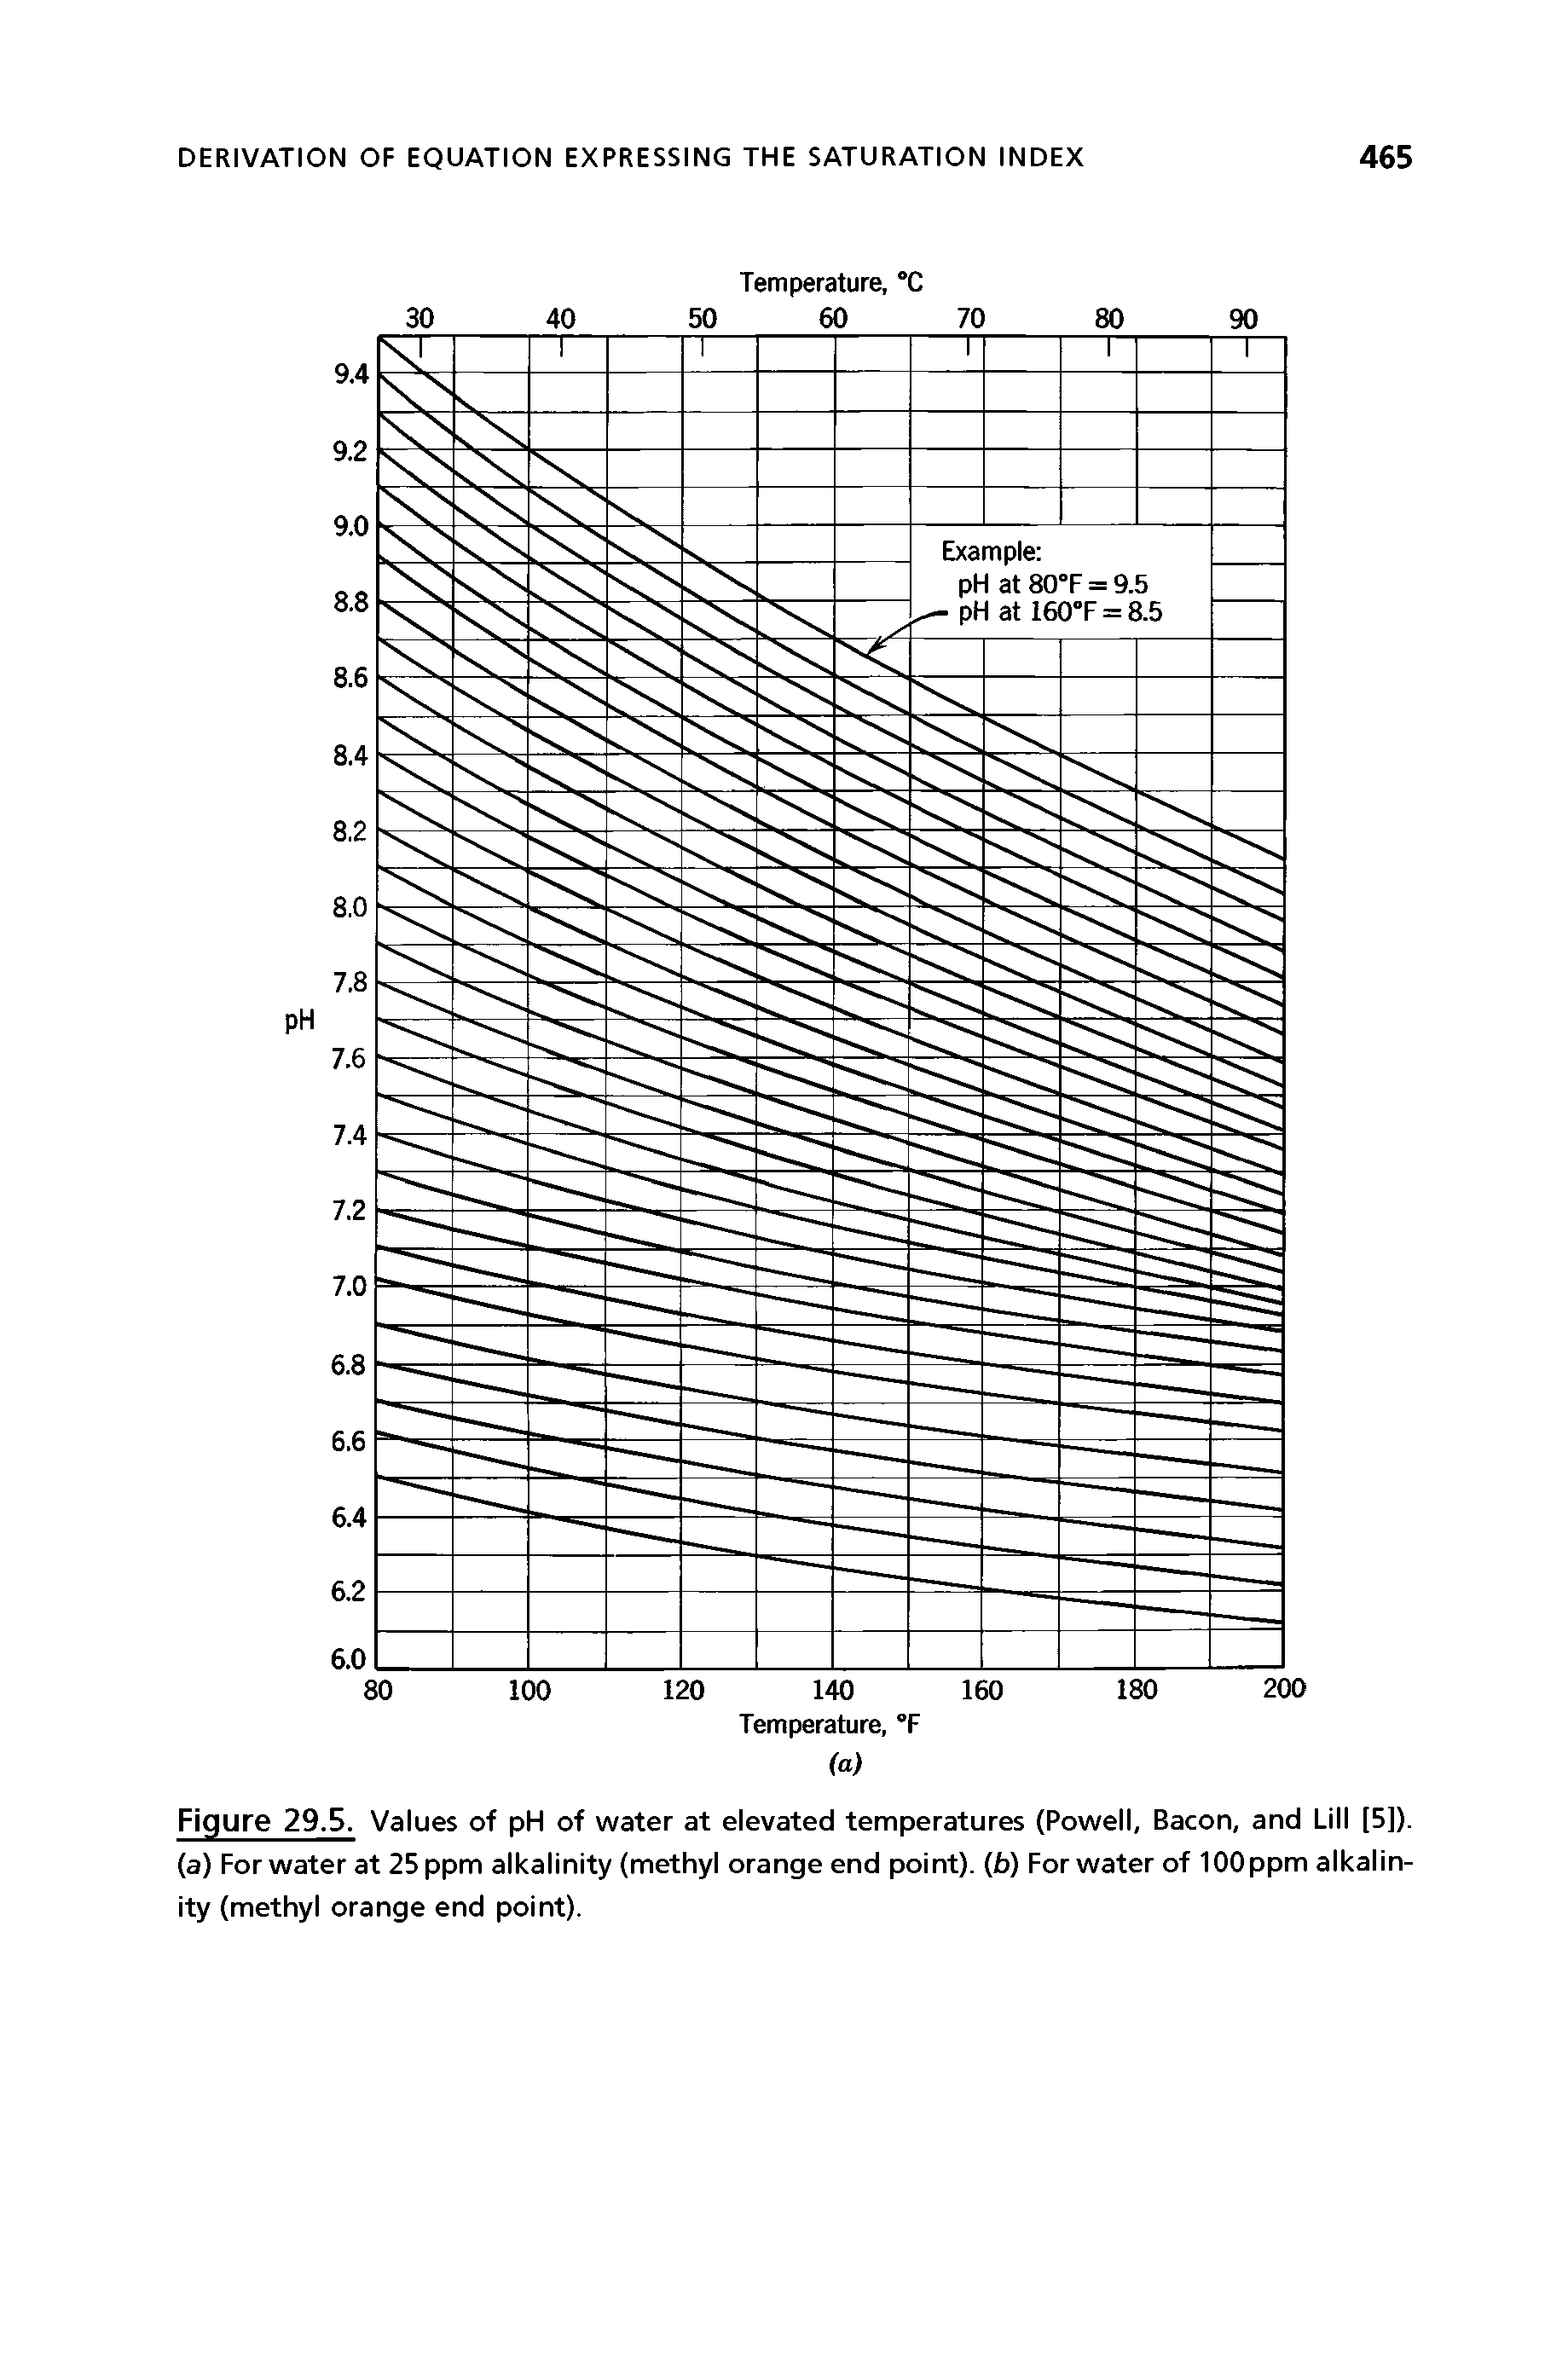 Figure 29.5. Values of pH of water at elevated temperatures (Powell, Bacon, and Lill [5]). (a) For water at 25 ppm alkalinity (methyl orange end point). (f>) For water of 100ppm alkalinity (methyl orange end point).